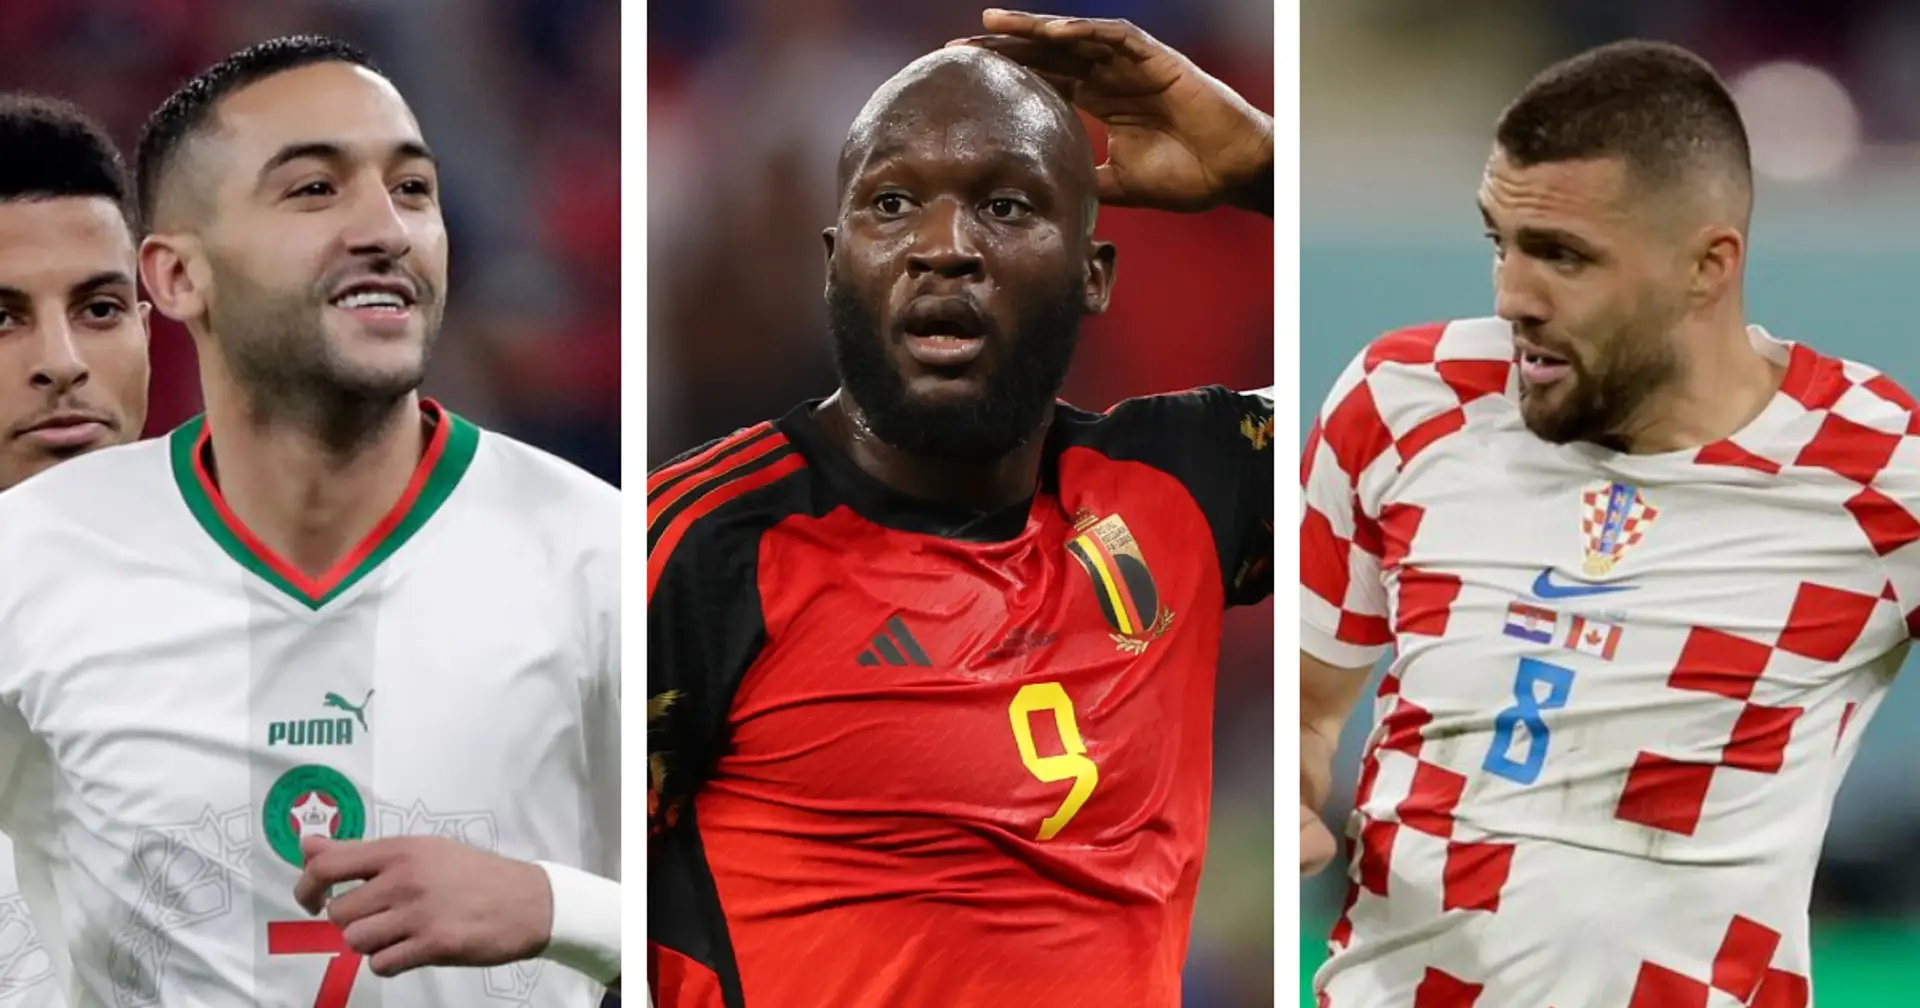 Ziyech and Kovacic through to World Cup Round of 16, Lukaku nightmare leads to Belgium exit